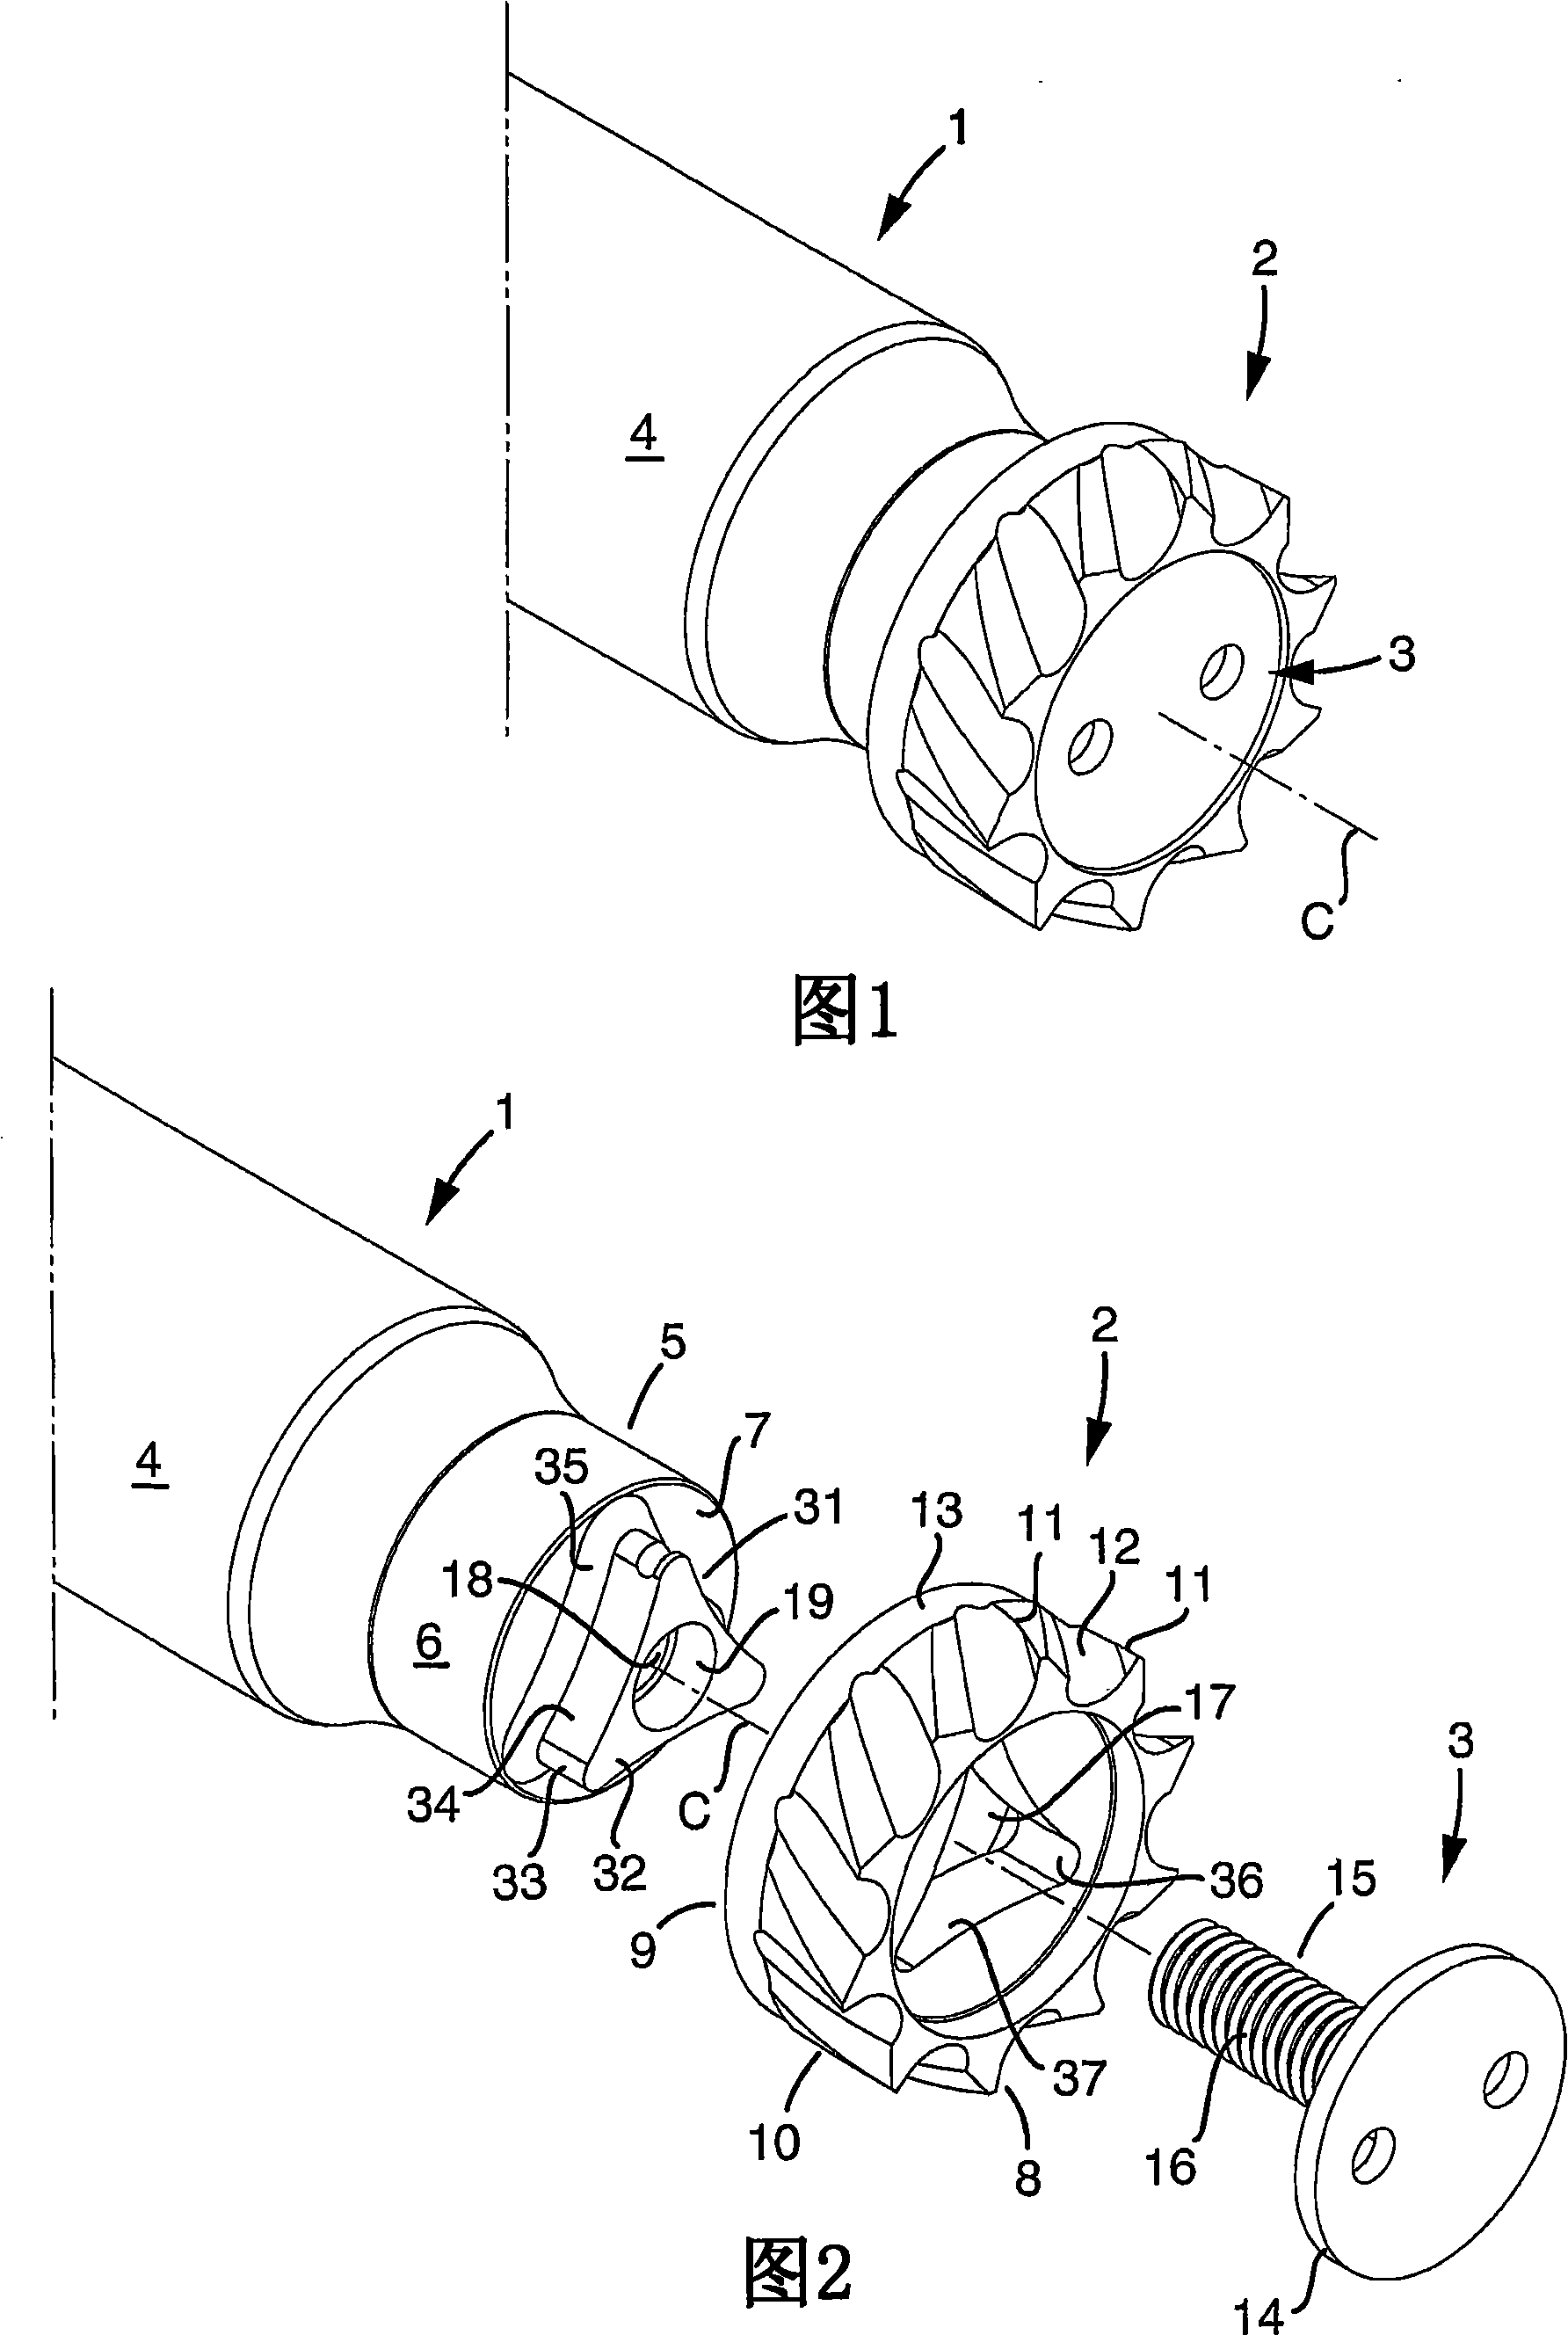 A milling cutter head and a milling cutter tool with holow spaces for receiving a male element